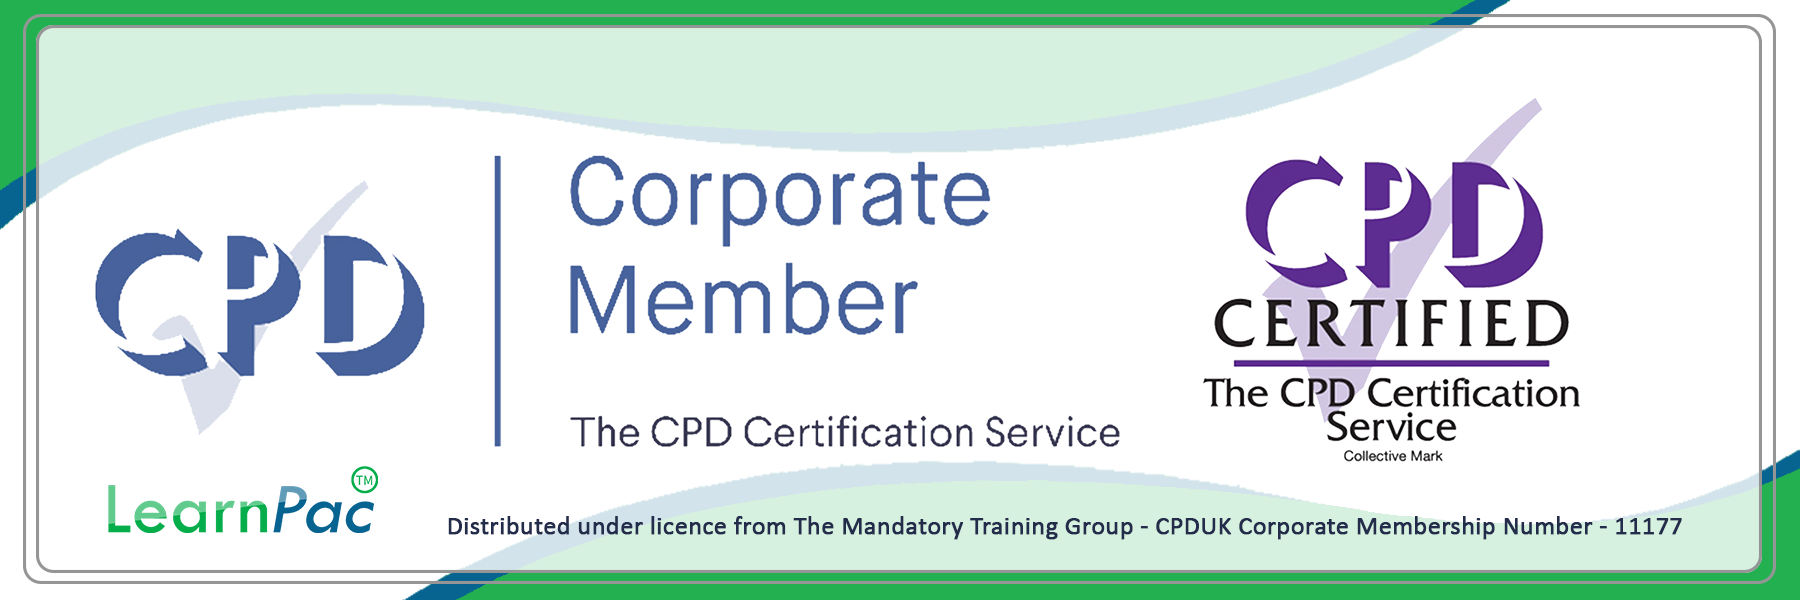 Clinical E-Learning Courses - E-Learning Courses with Certificates - CPD Certified - LearnPac Systems UK -